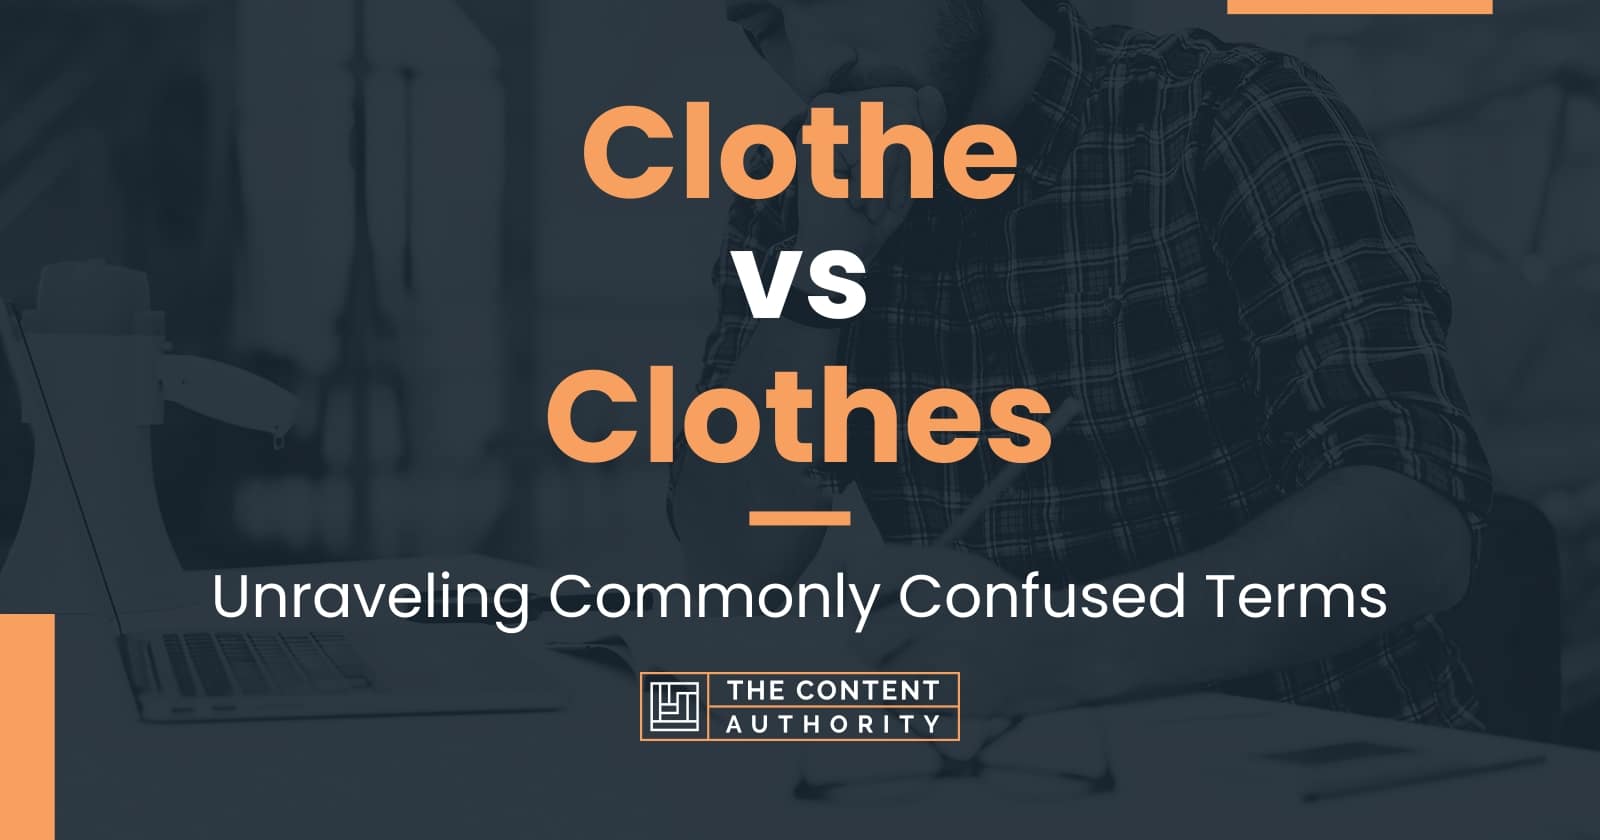 Clothe vs Clothes: Unraveling Commonly Confused Terms